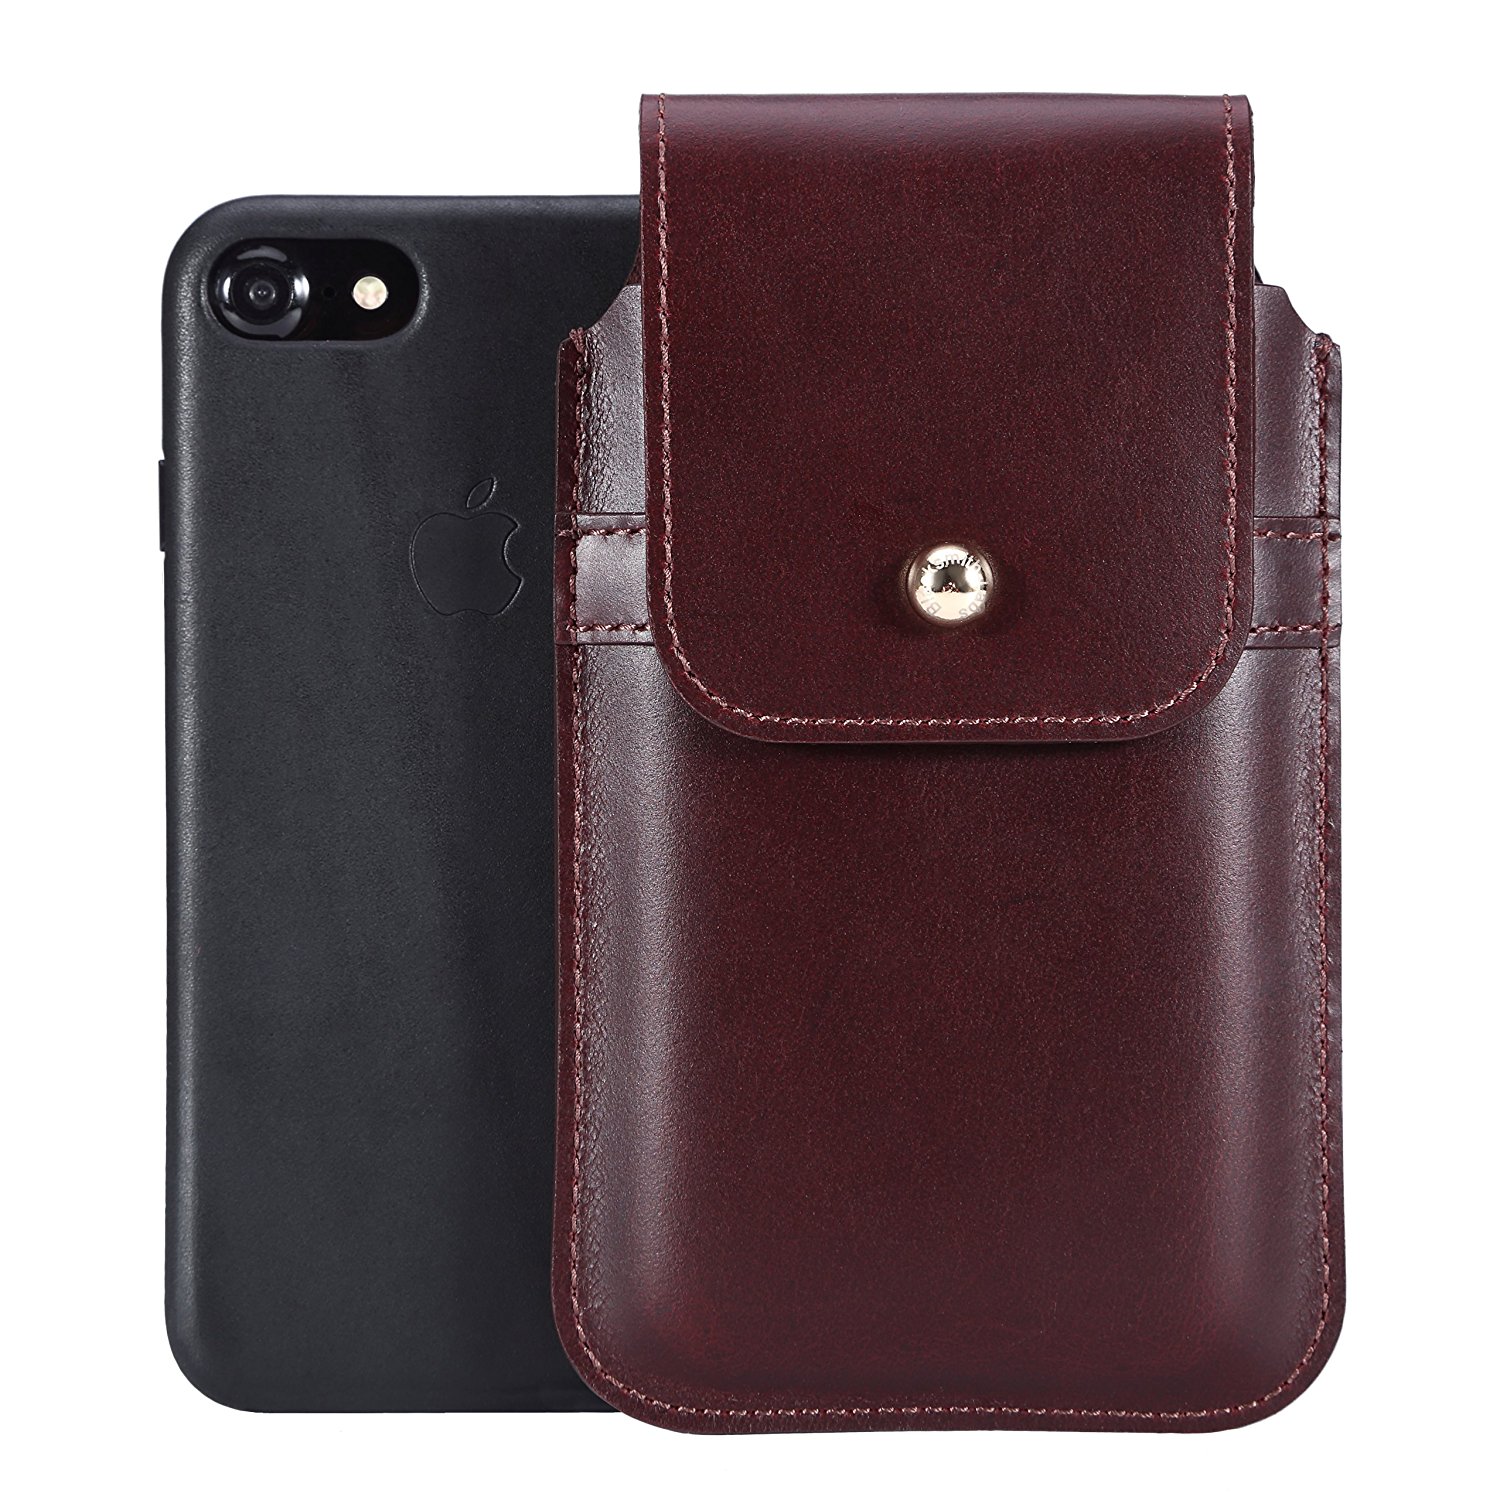 Blacksmith-Labs Holster Case for iPhone 6; iPhone 6s, iPhone 7 - Brown